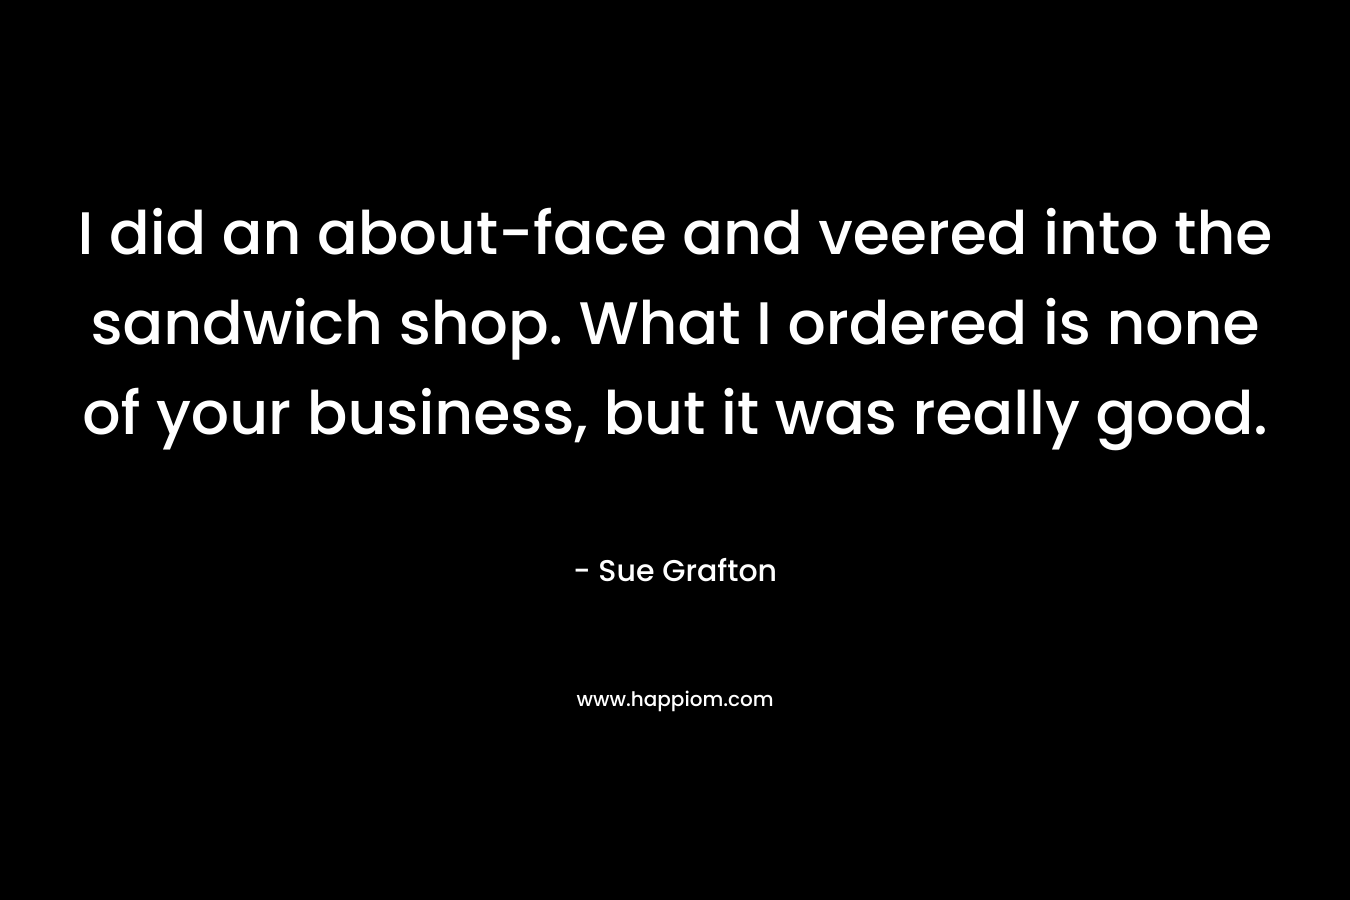 I did an about-face and veered into the sandwich shop. What I ordered is none of your business, but it was really good. – Sue Grafton